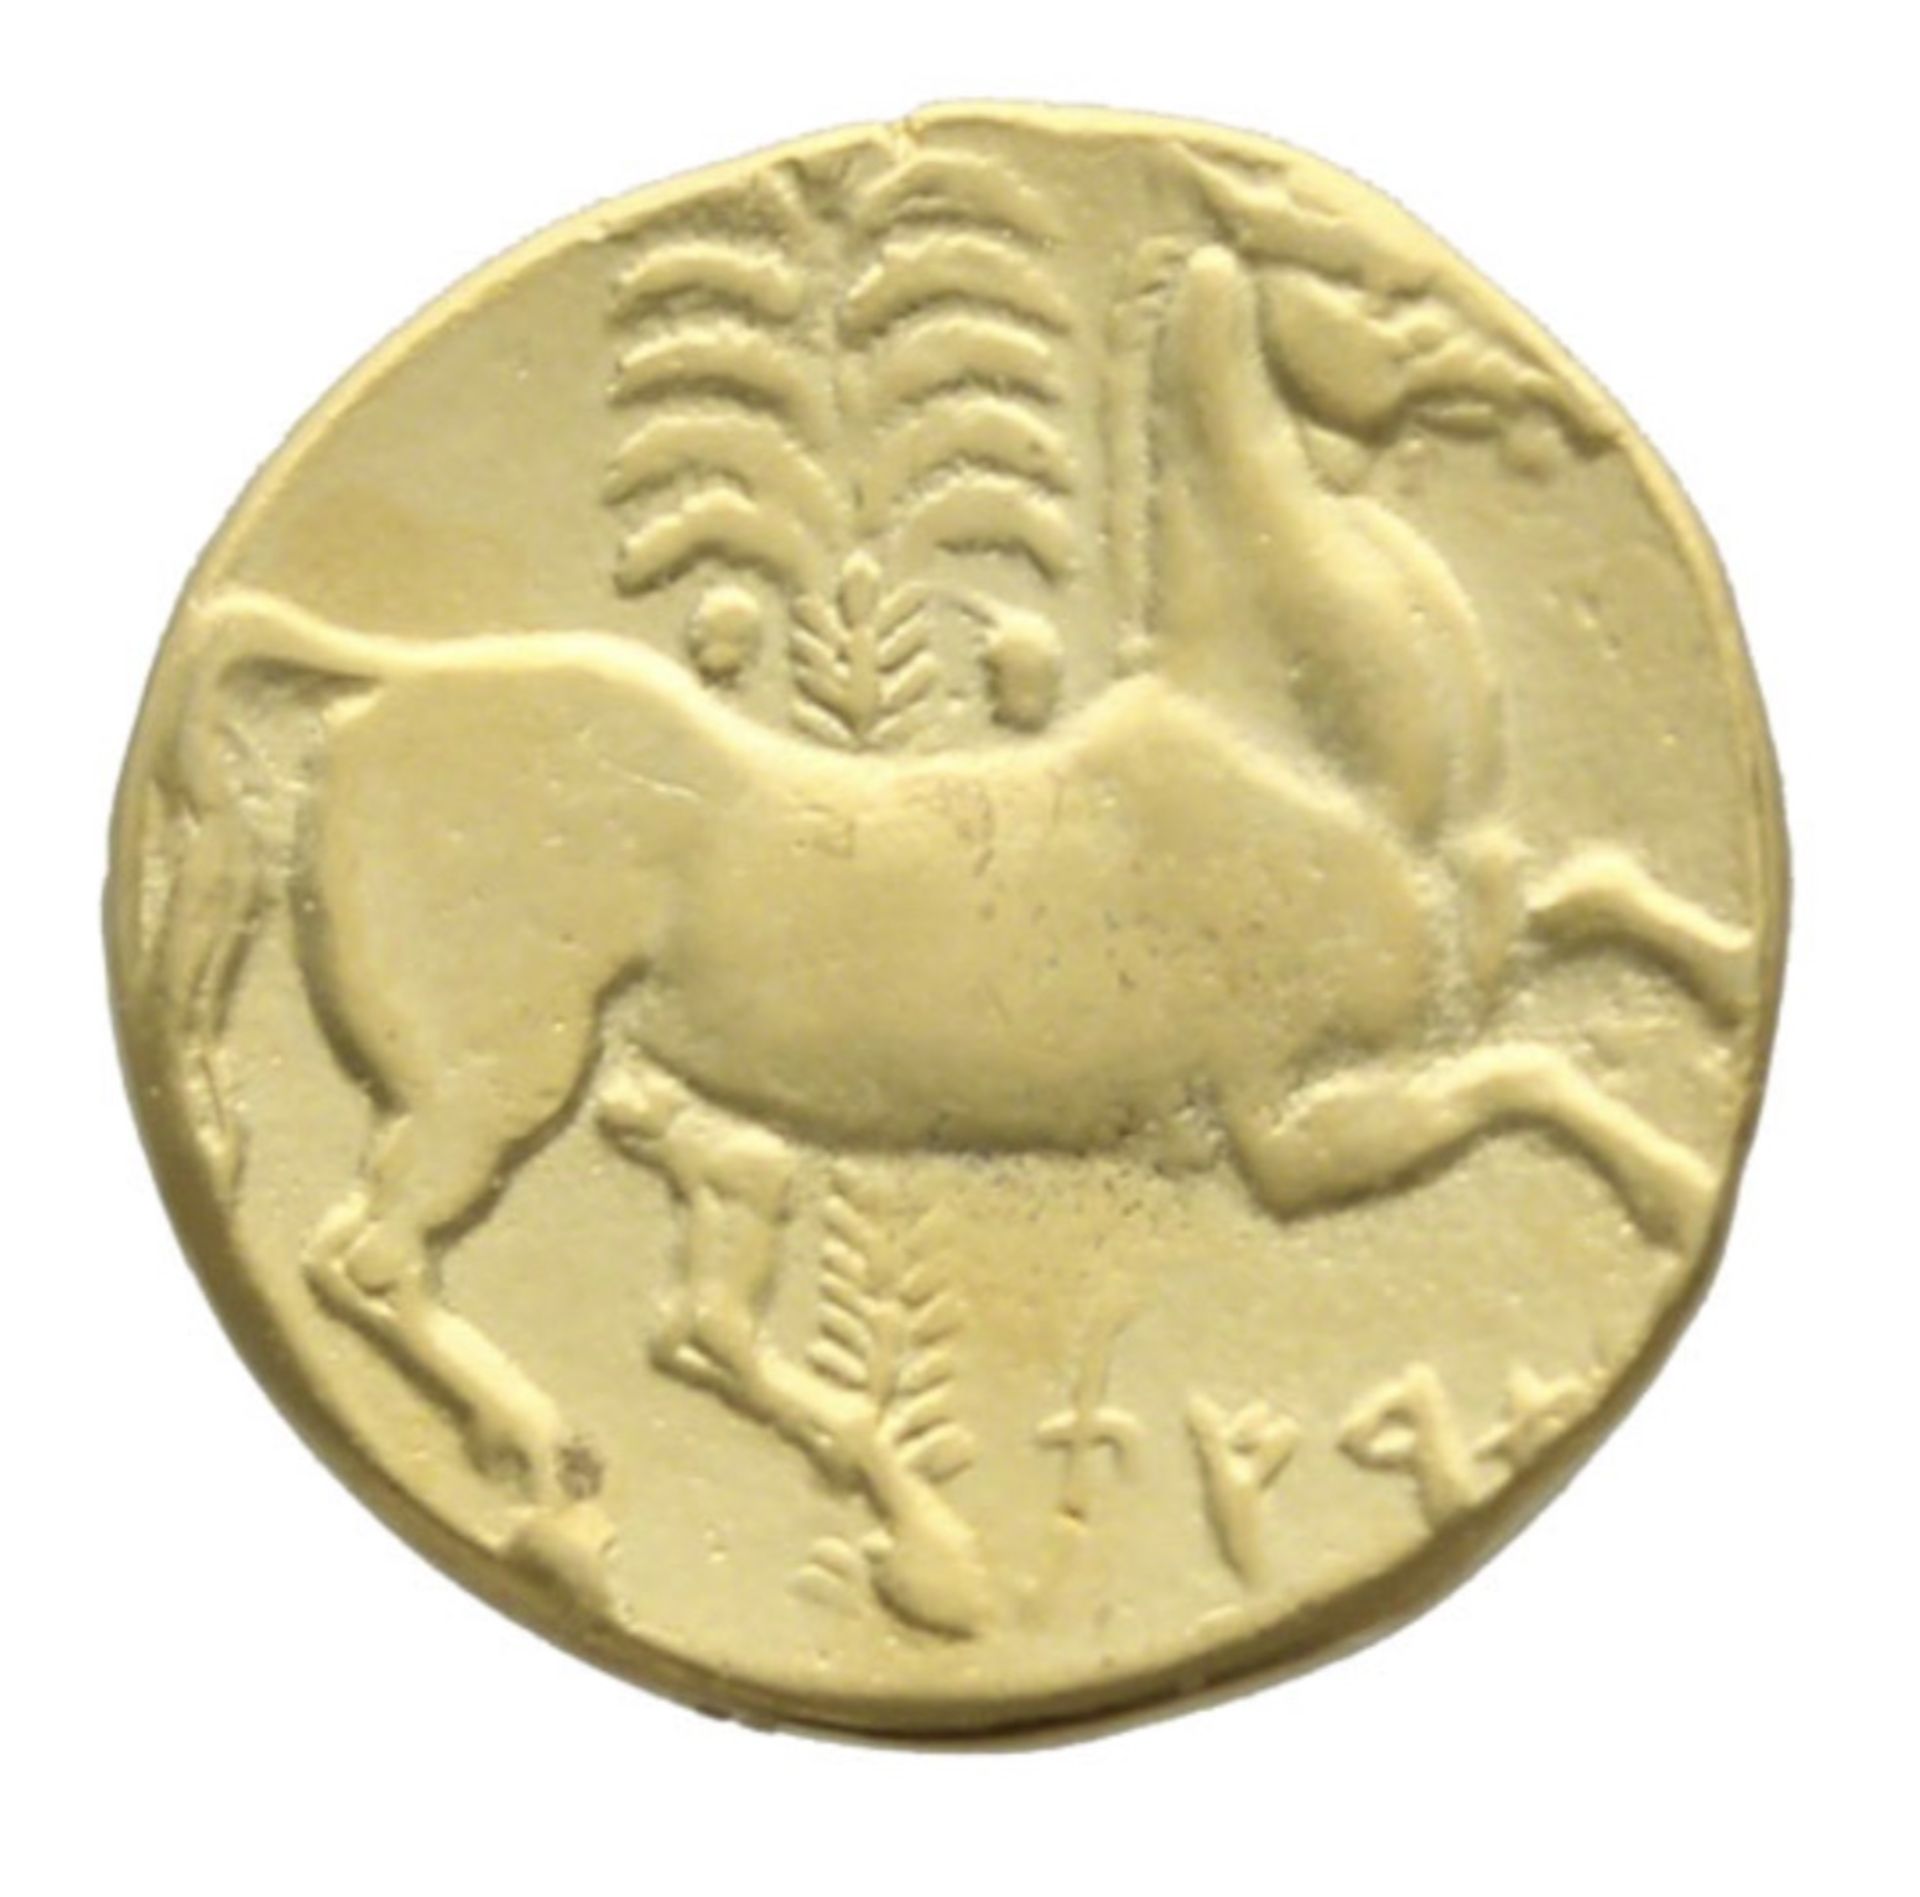 Carthage Tristater, First Punic War 264-241 BC Coin - Image 2 of 2